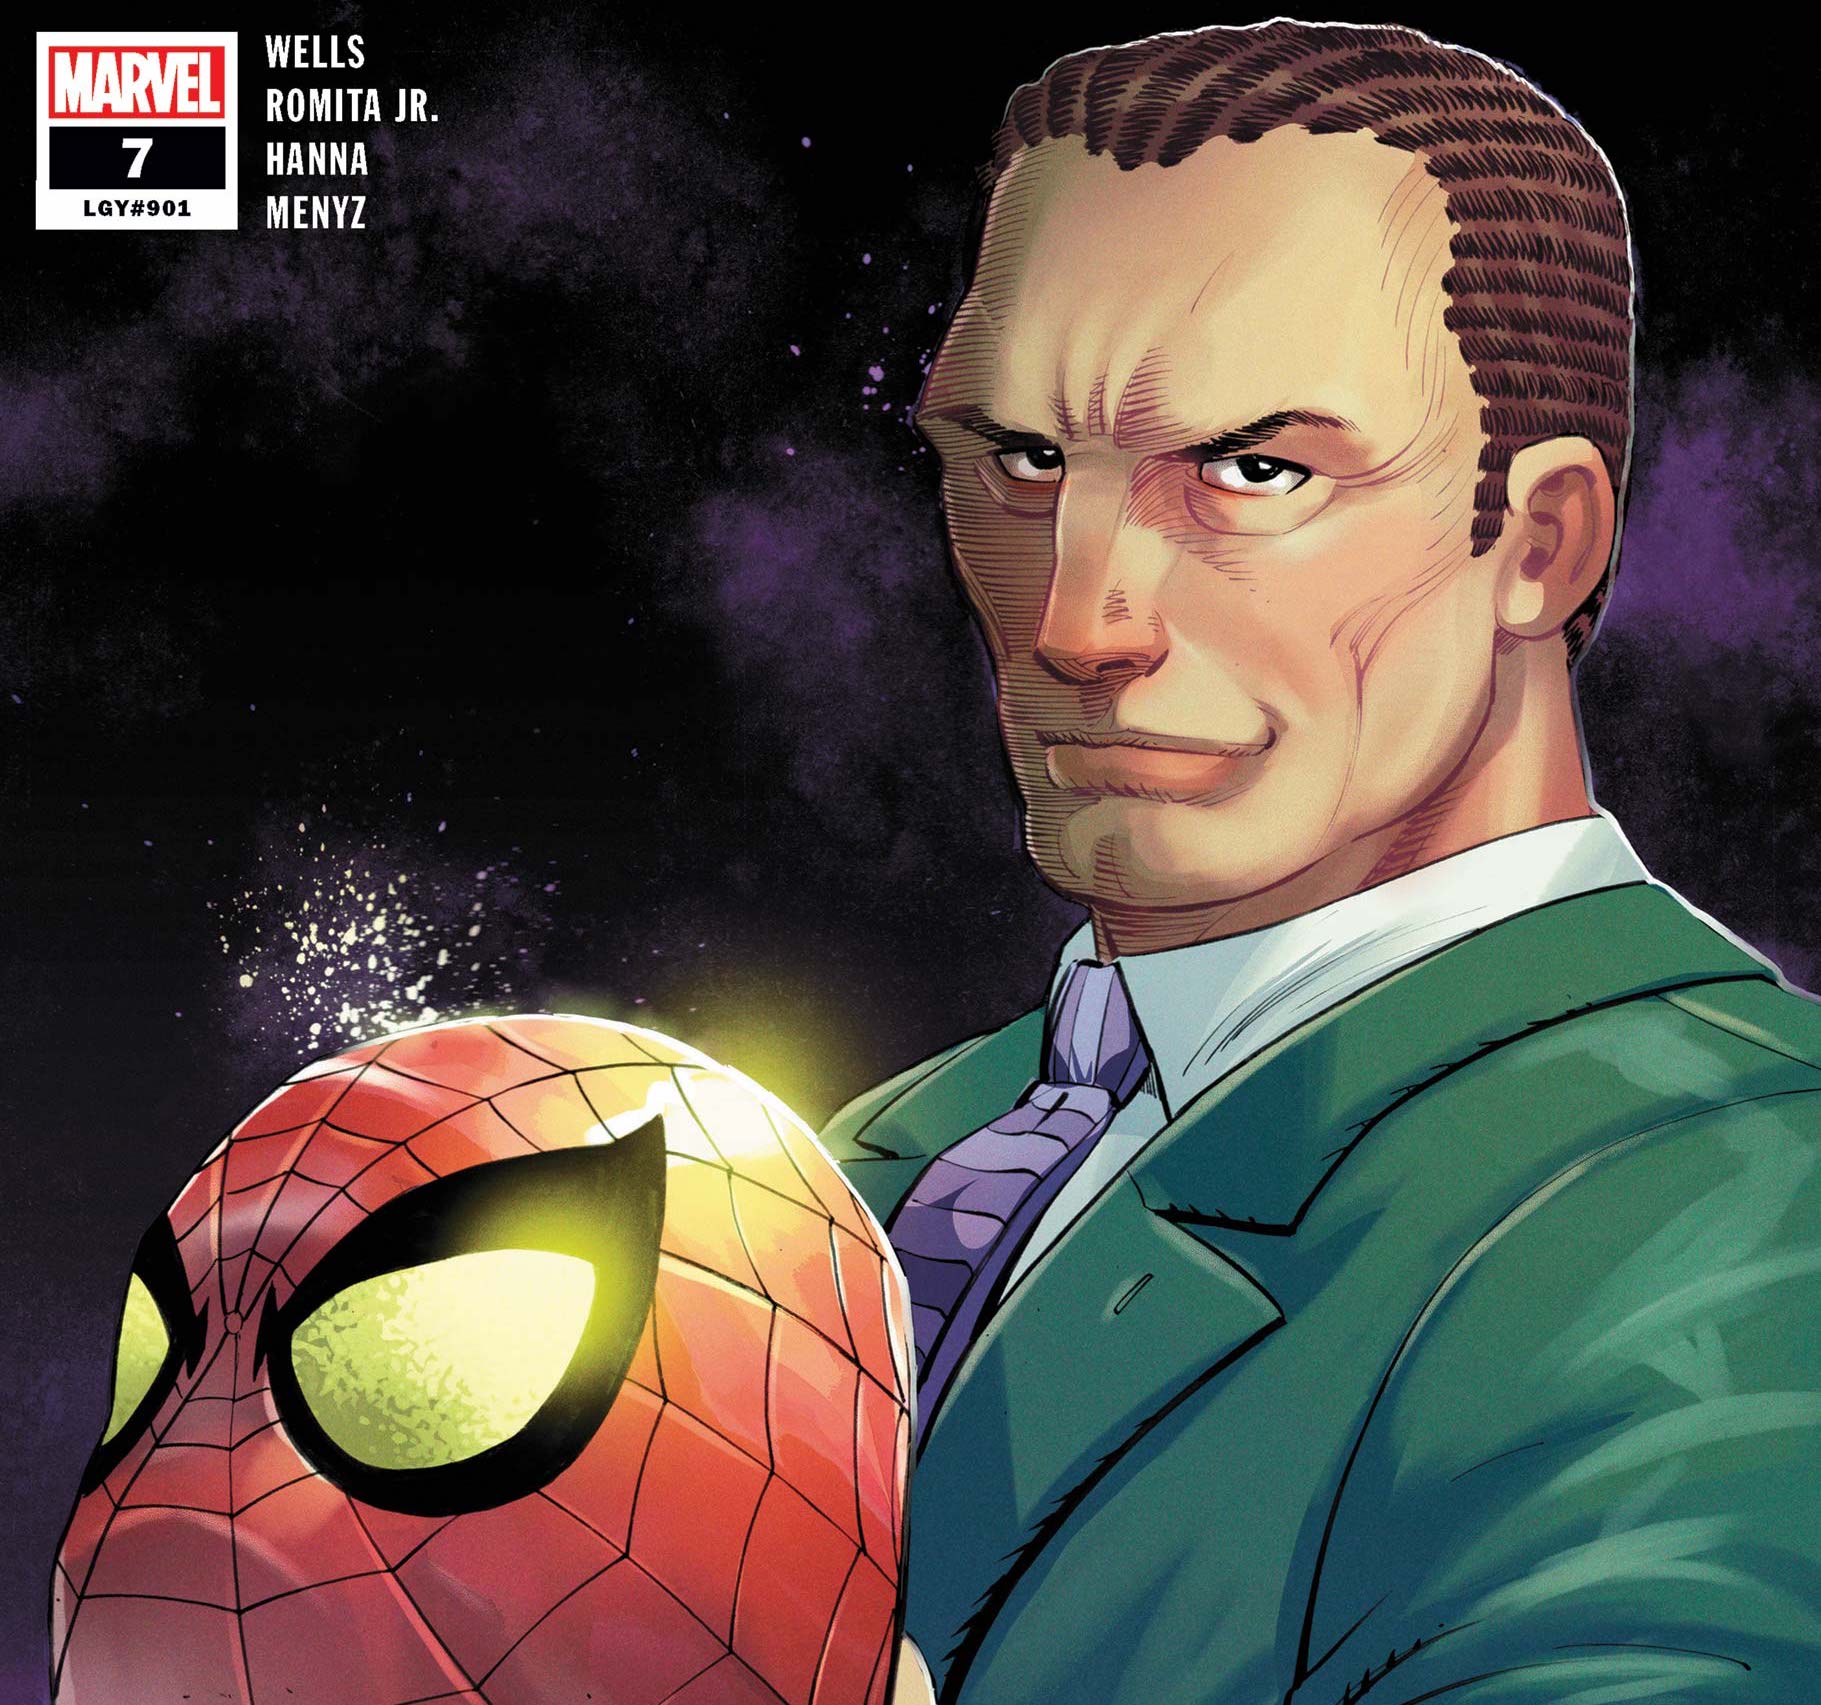 'Amazing Spider-Man' #7 (LGY #901) explores Peter Parker's anger